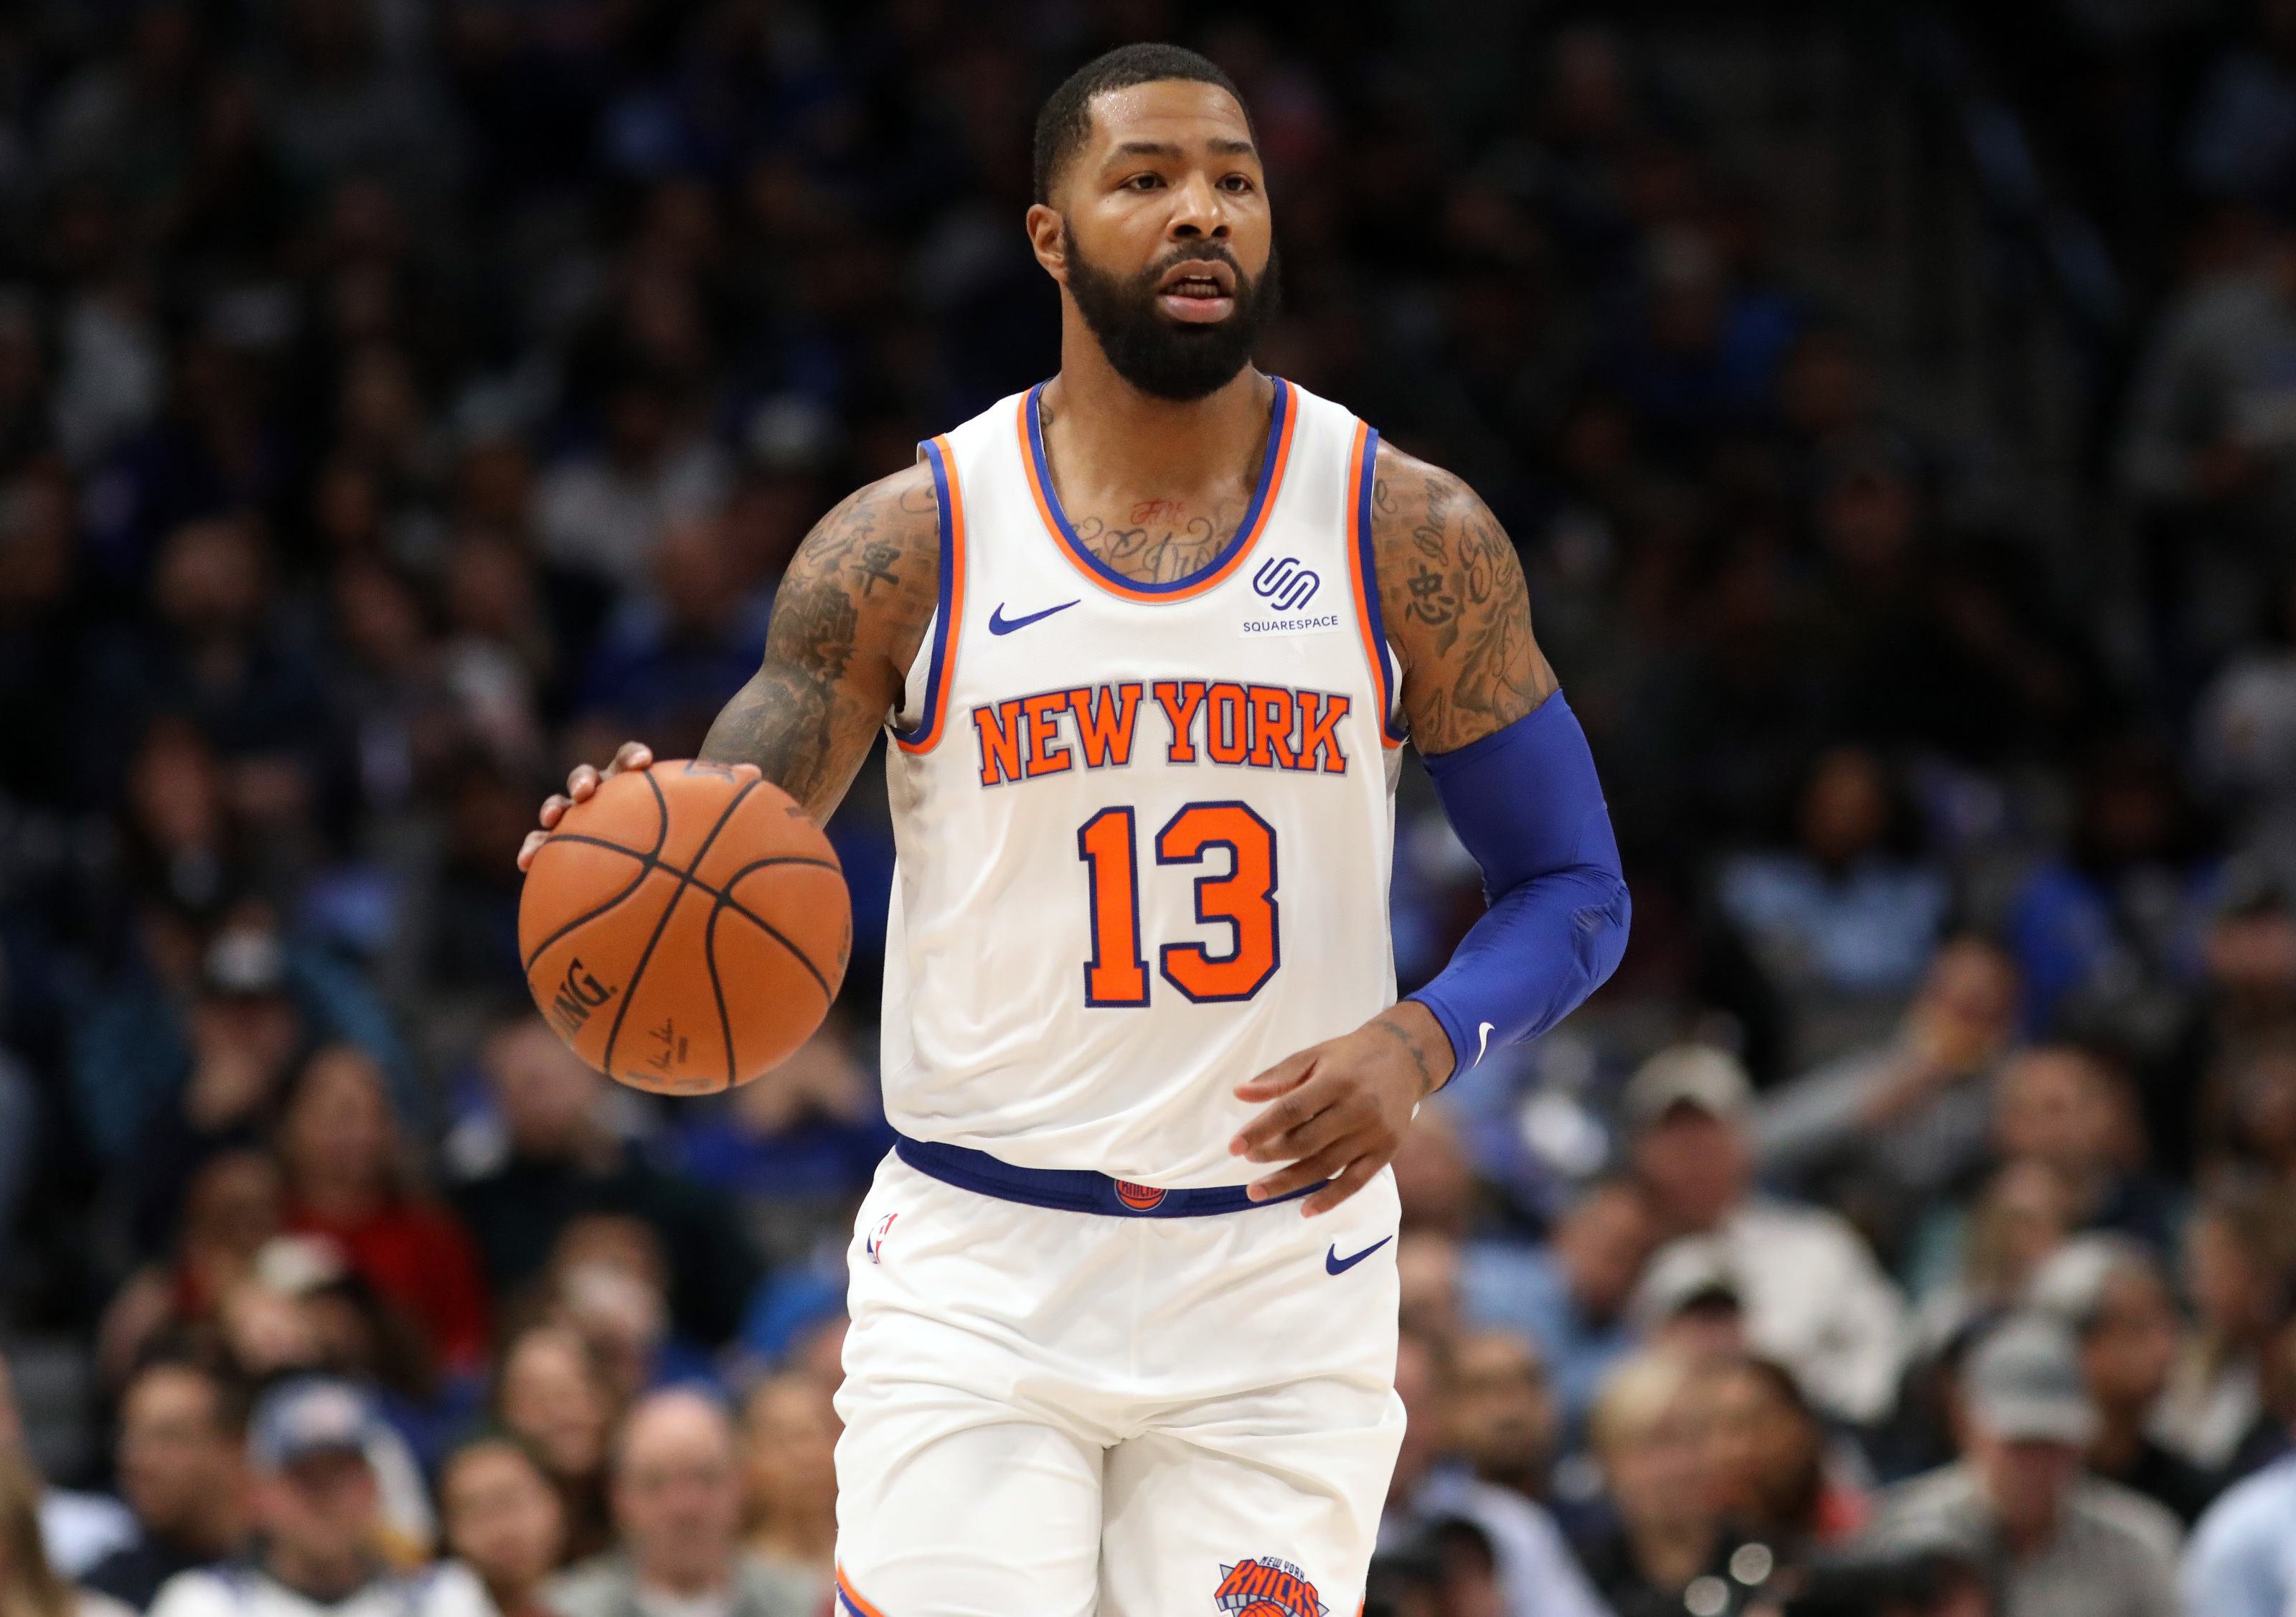 Inspirational Story Why Marcus Morris Changed His Name to Marcus Morris SR.  